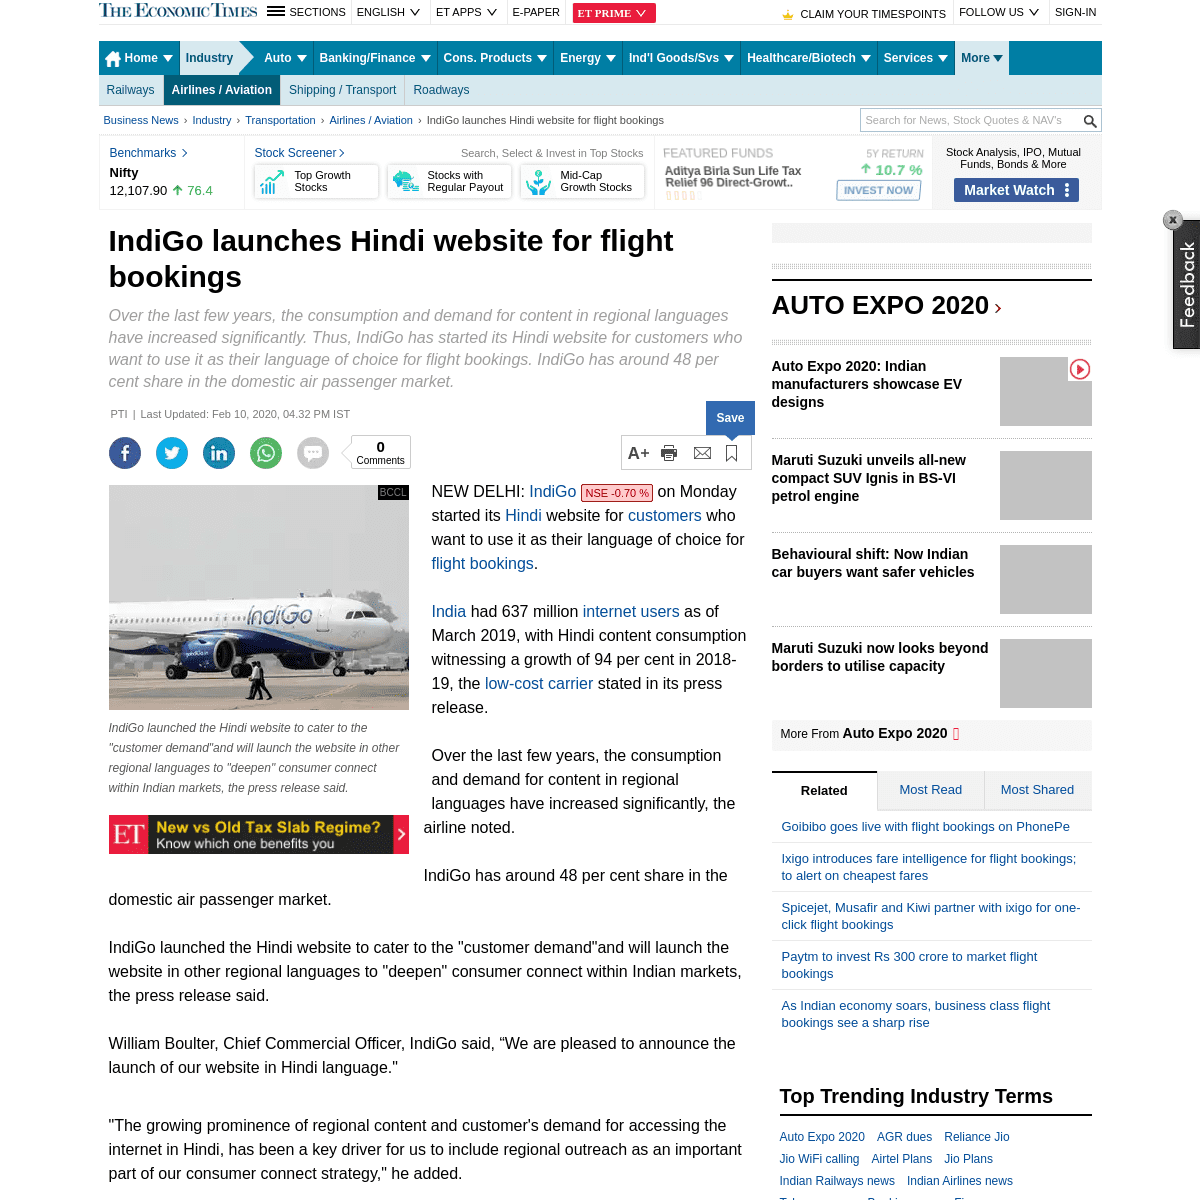 A complete backup of economictimes.indiatimes.com/industry/transportation/airlines-/-aviation/indigo-launches-hindi-website-for-